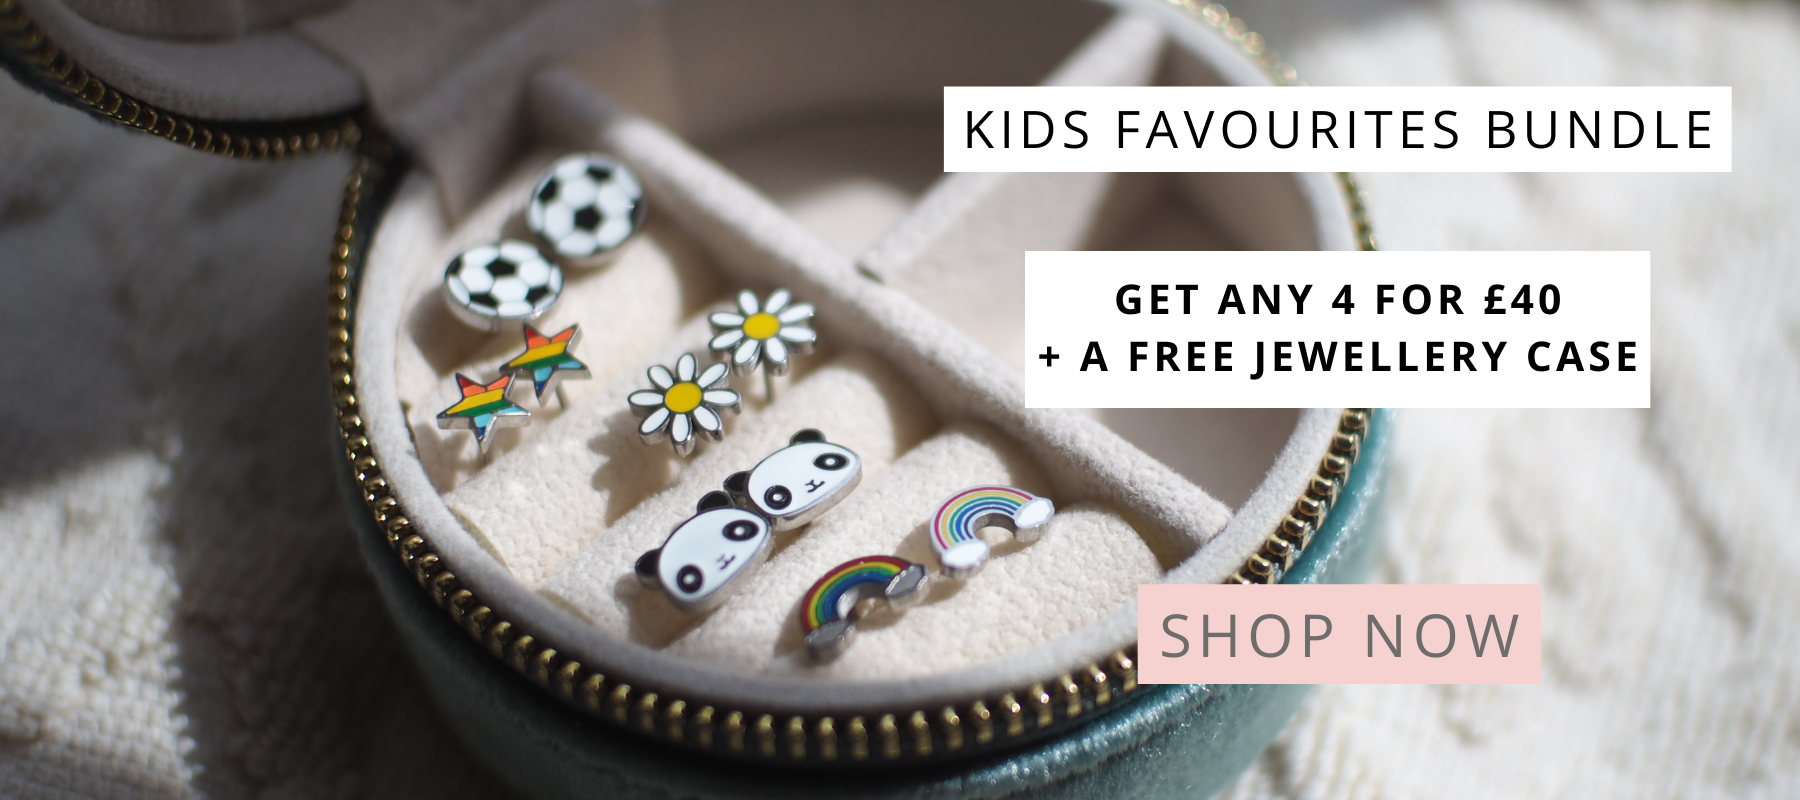 KIDS FAVOURITES BUNDLE - get any 4 items for £40 plus a free jewellery case